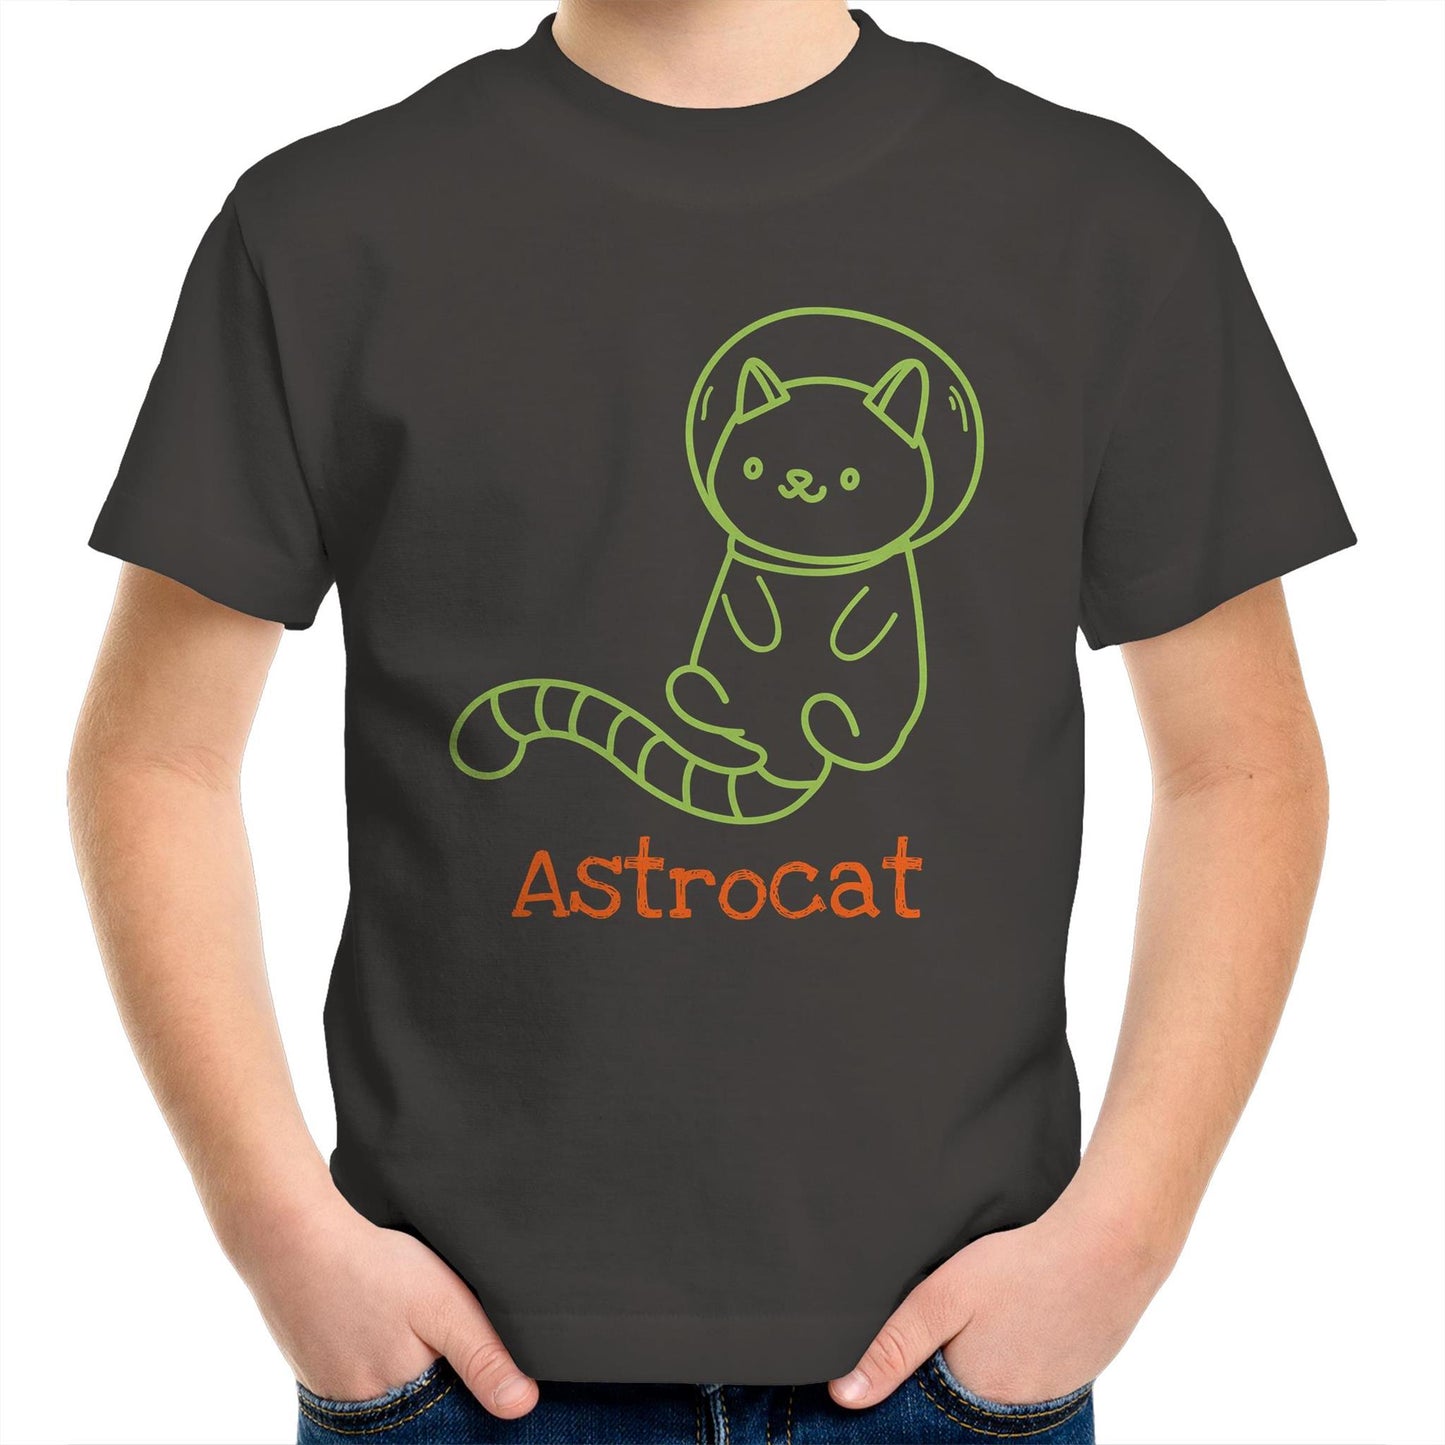 Astrocat - Kids Youth Crew T-Shirt Charcoal Kids Youth T-shirt animal Funny Space